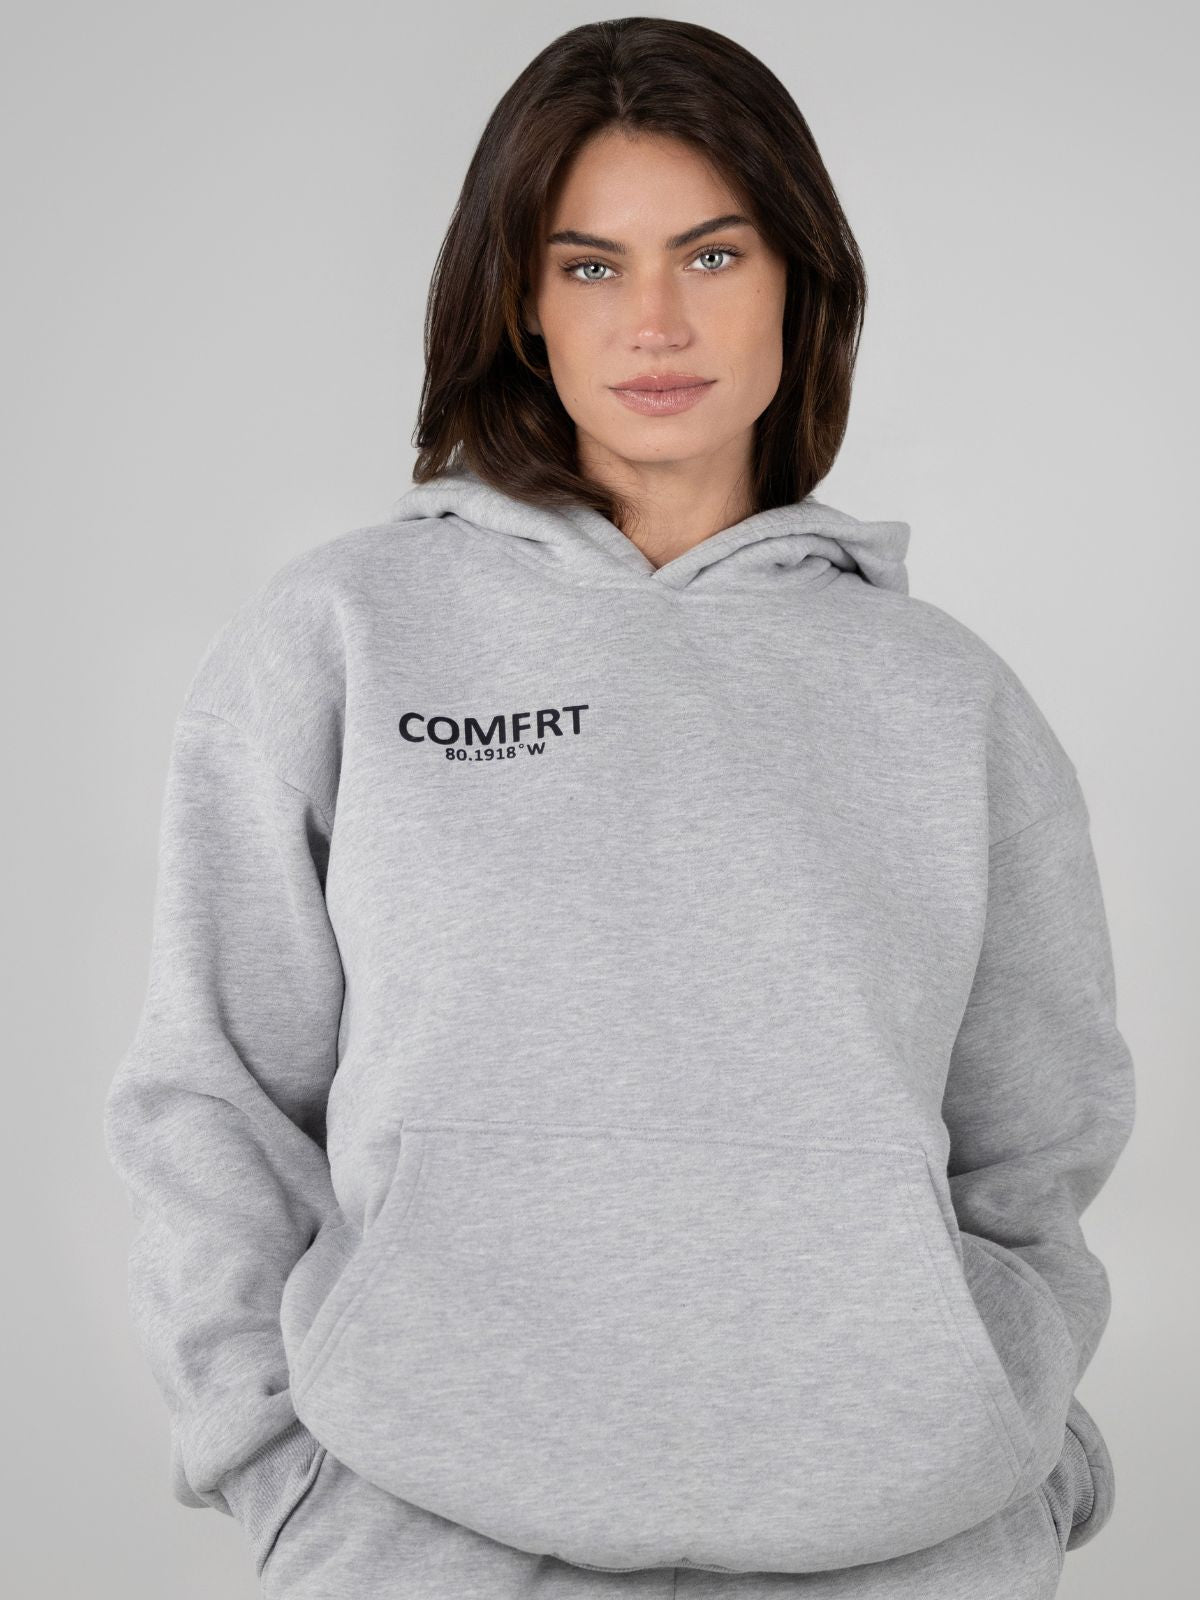 Hoodie that helps with ANXIETY?? (comfrt clothing review) 